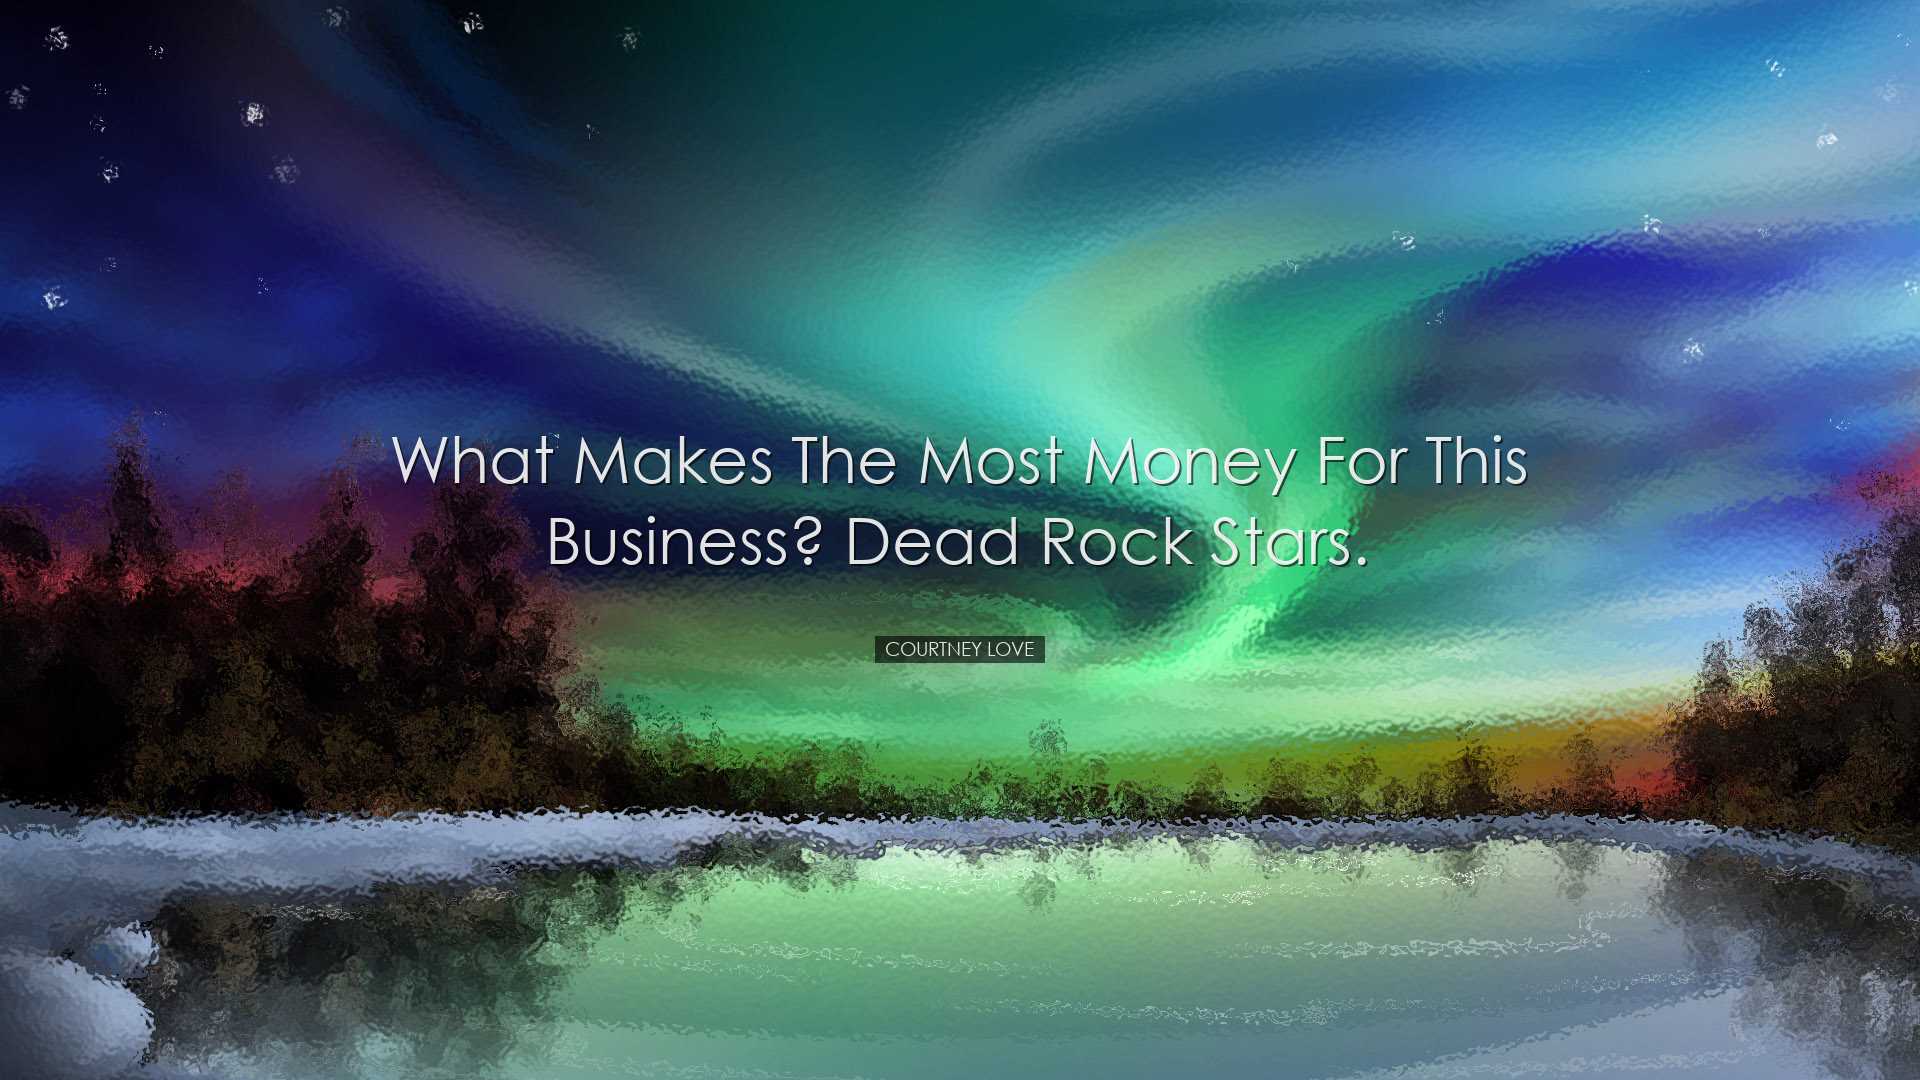 What makes the most money for this business? Dead rock stars. - Co